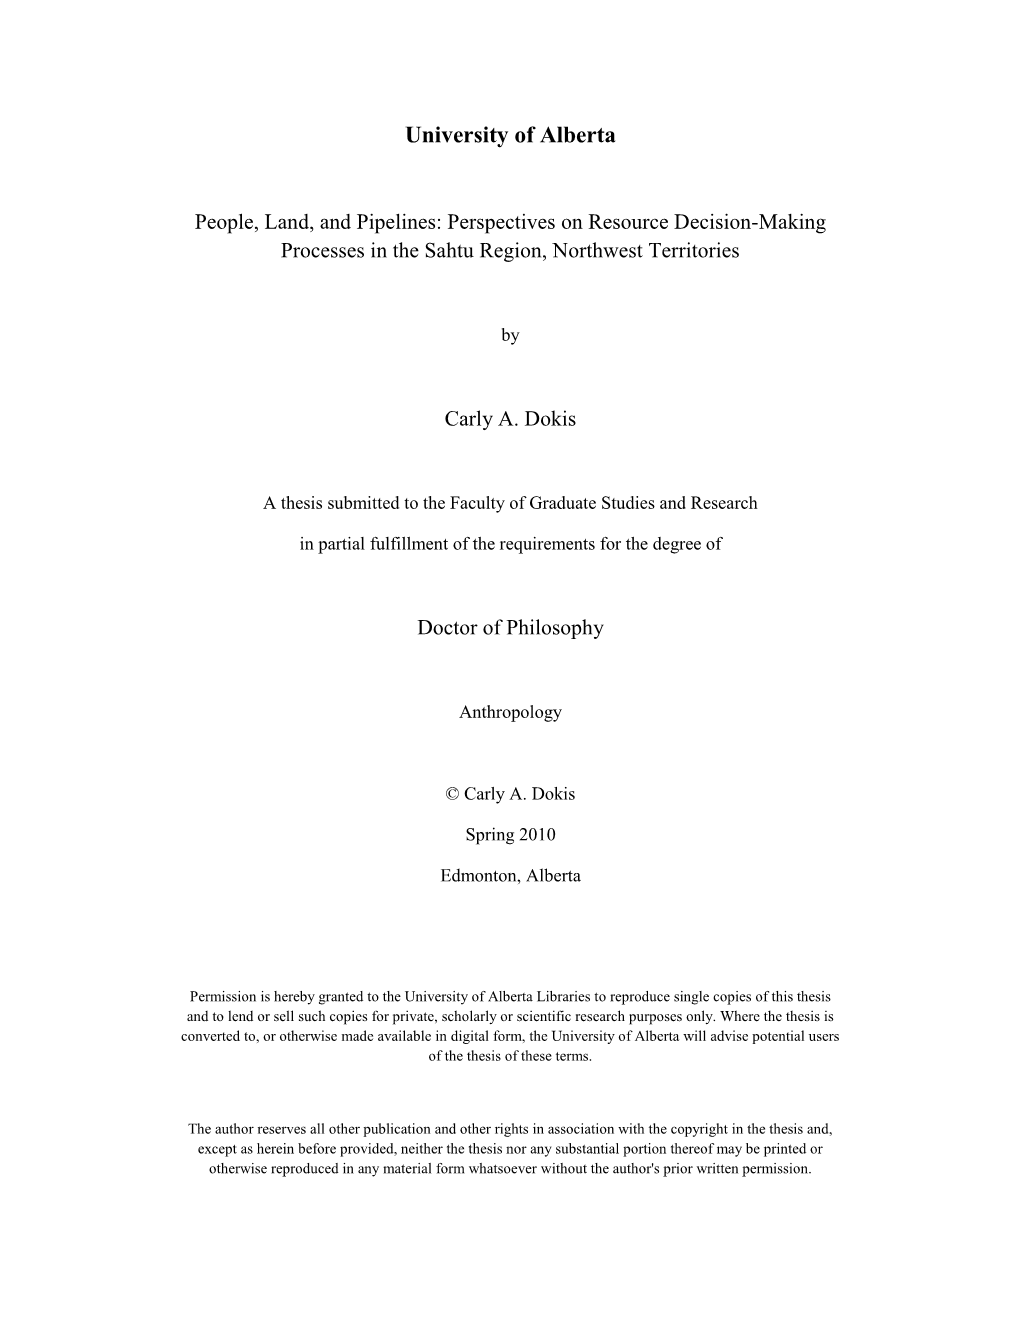 People, Land, and Pipelines: Perspectives on Resource Decision-Making Processes in the Sahtu Region, Northwest Territories